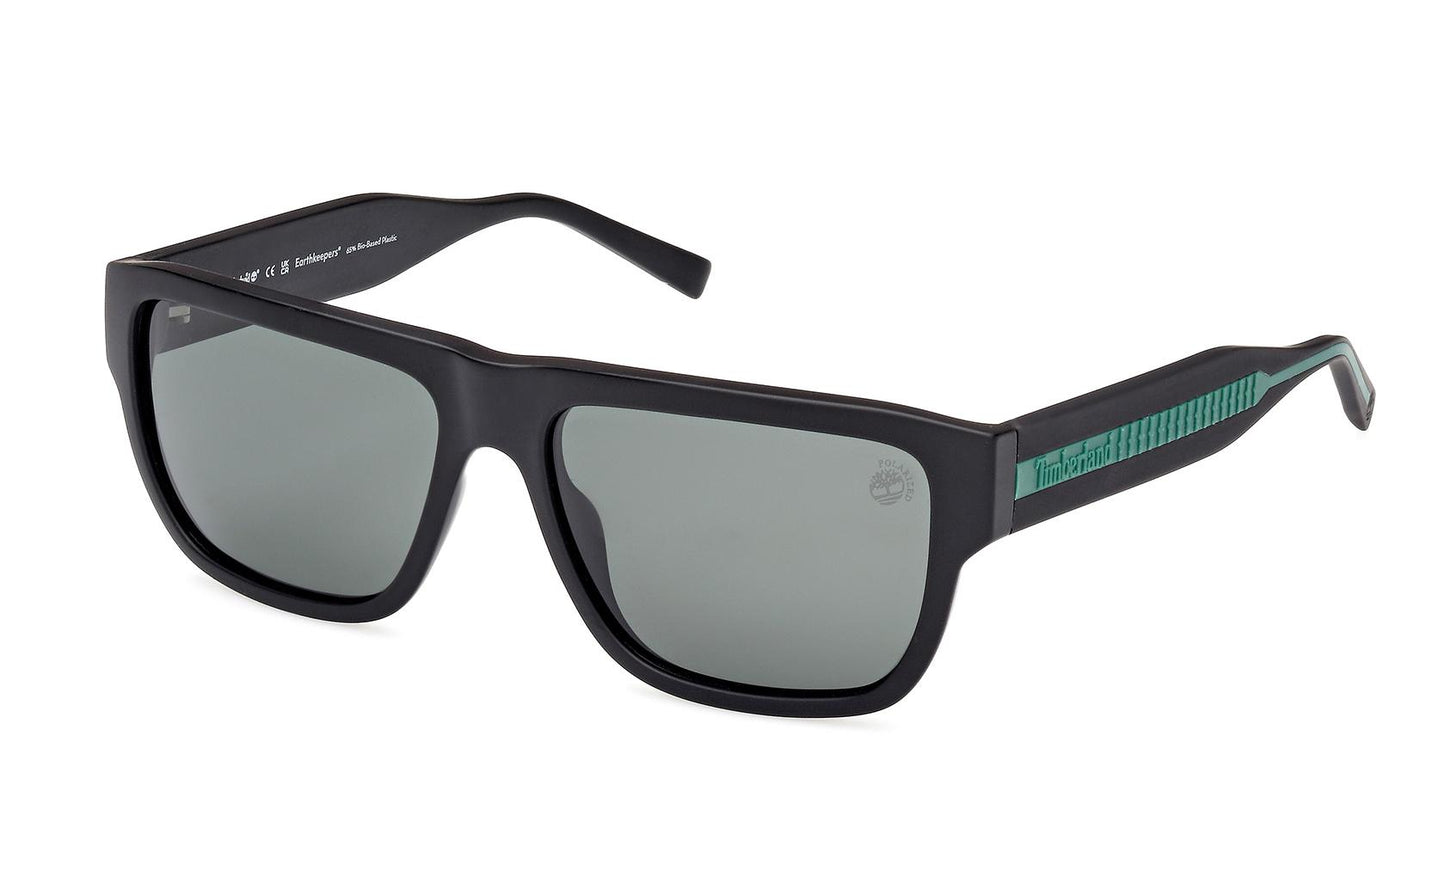 TB9282 Sunglasses Frames by Timberland